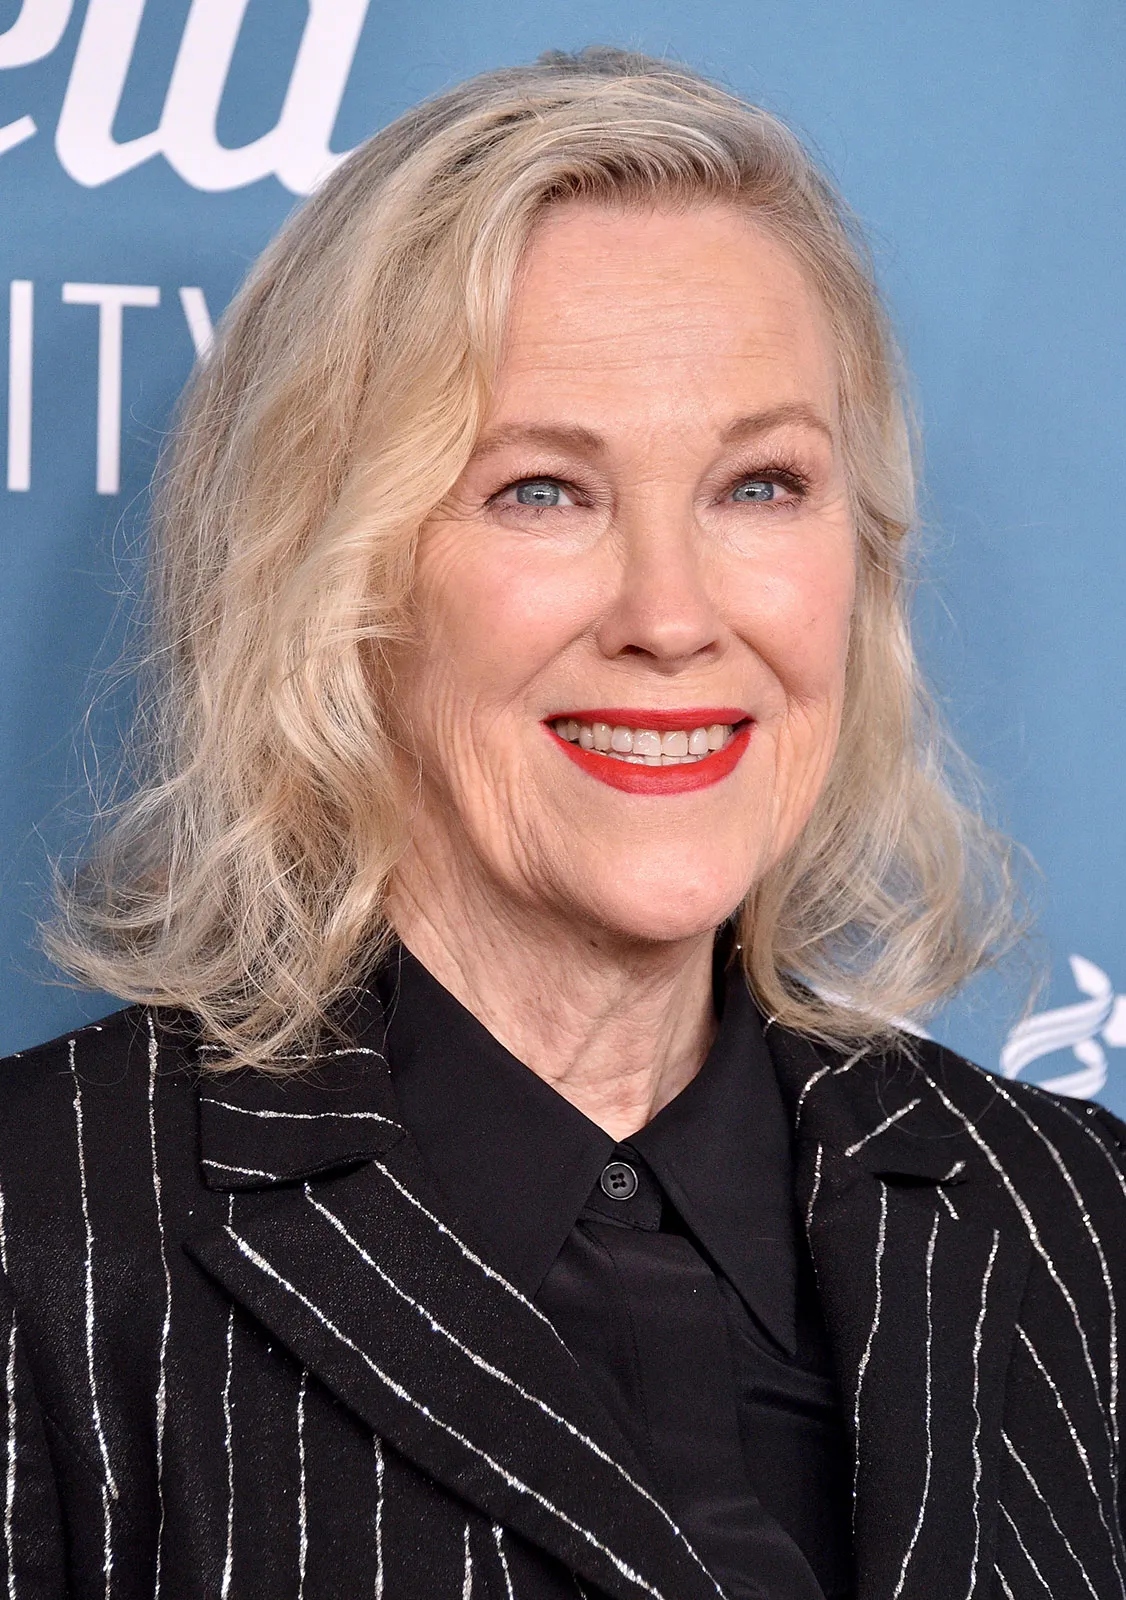 Catherine O'Hara wearing a black outfit